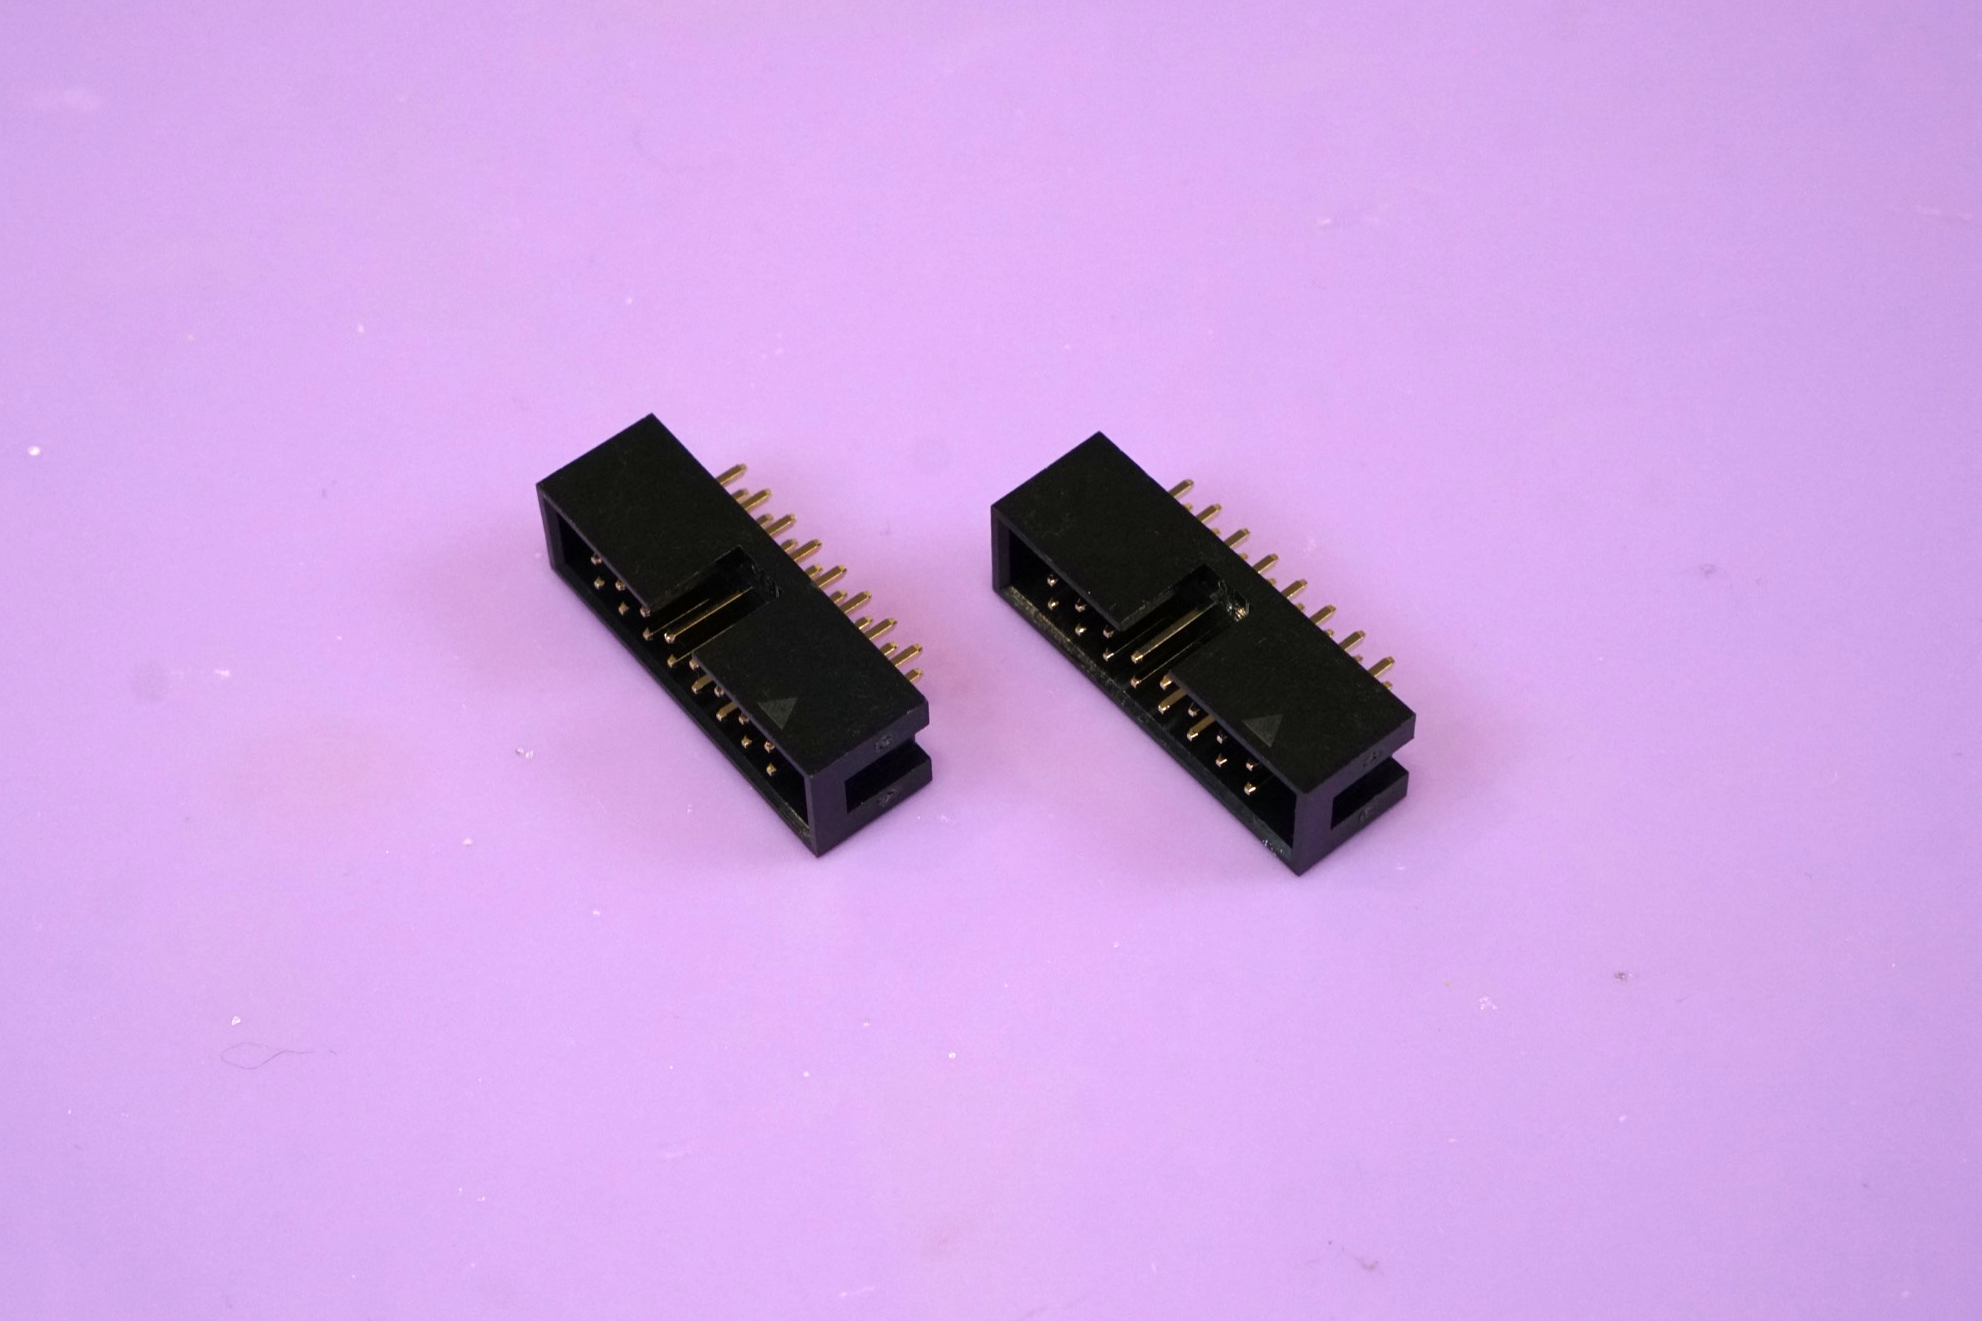 Photo of the two 16-pin shielded IDC headers